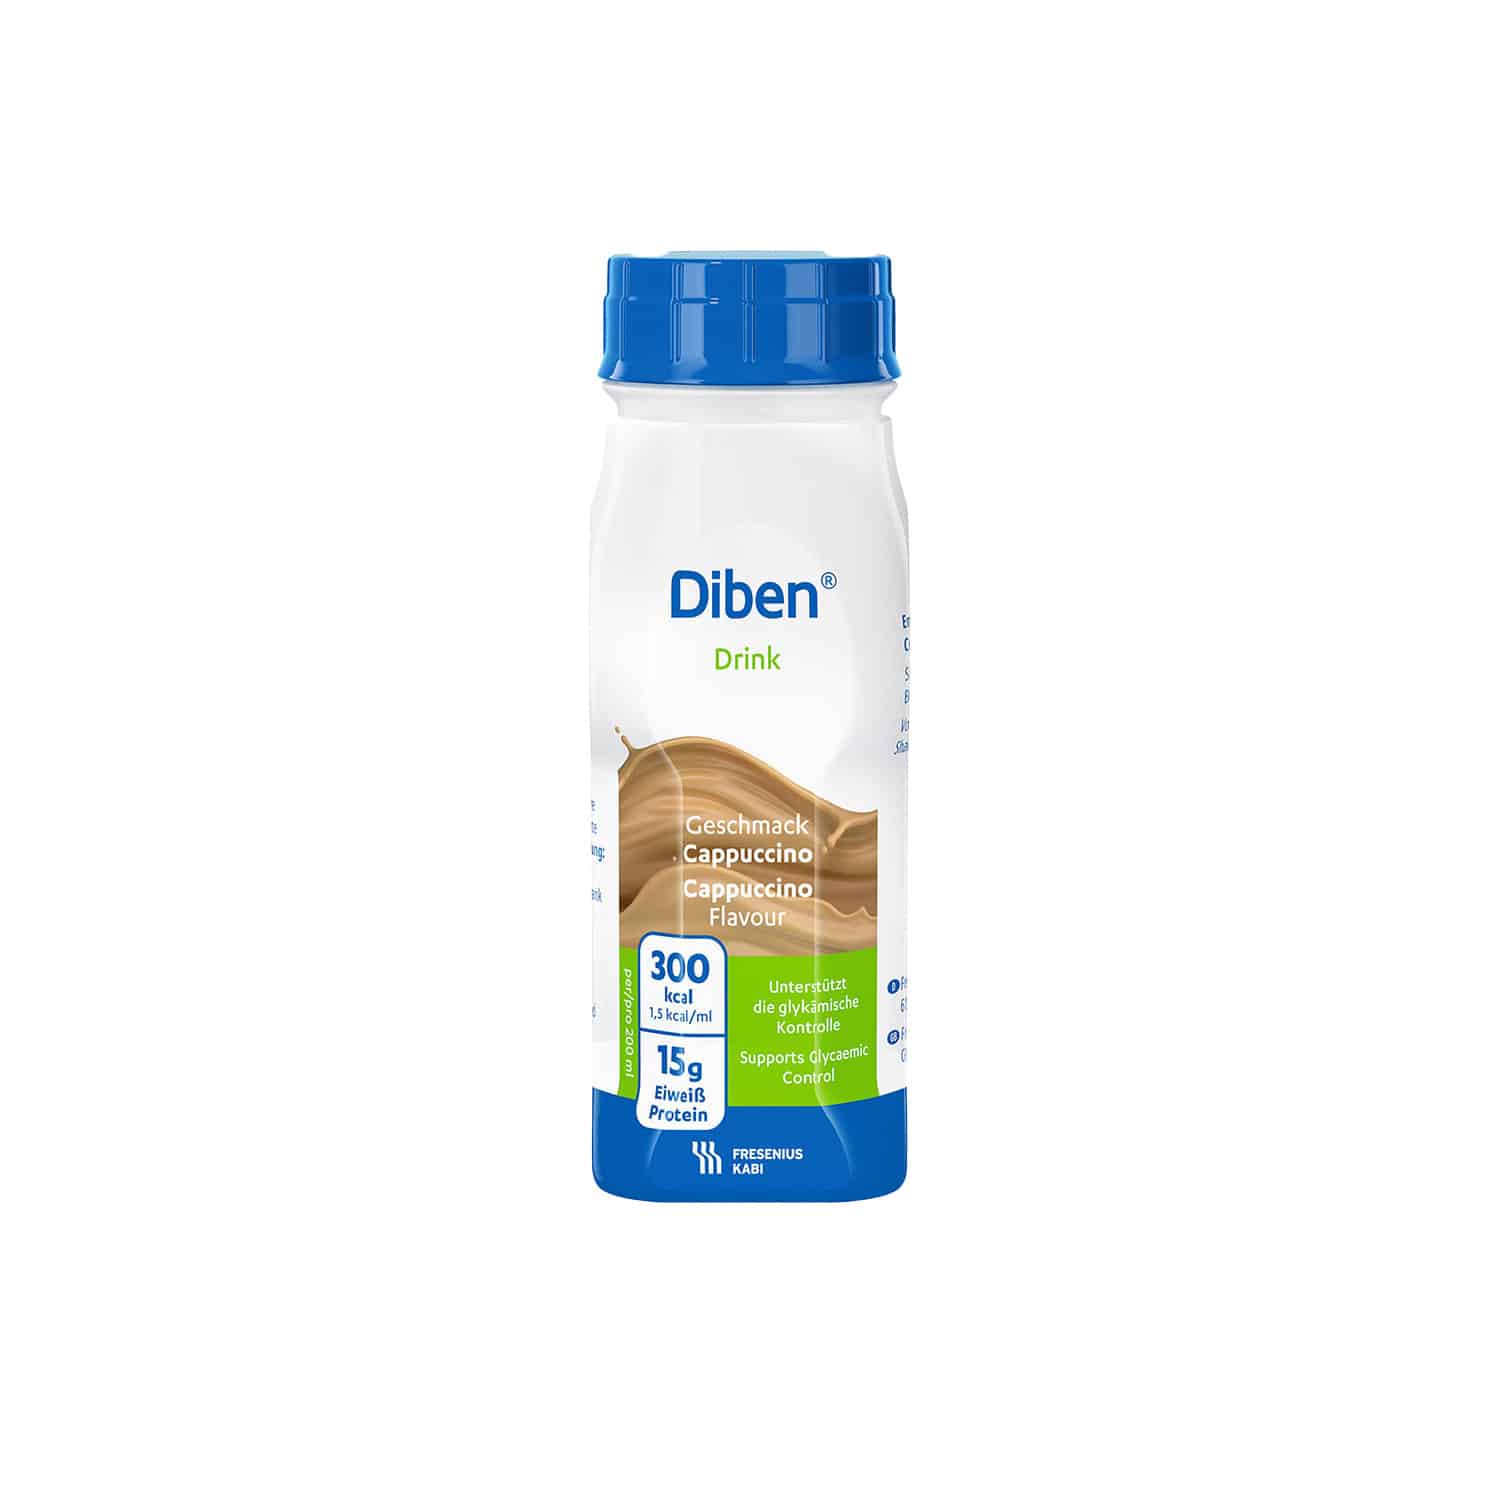 Diben_DRINK_from_Fresenius___carbohydrate-modified_with_low_glycaemic_index